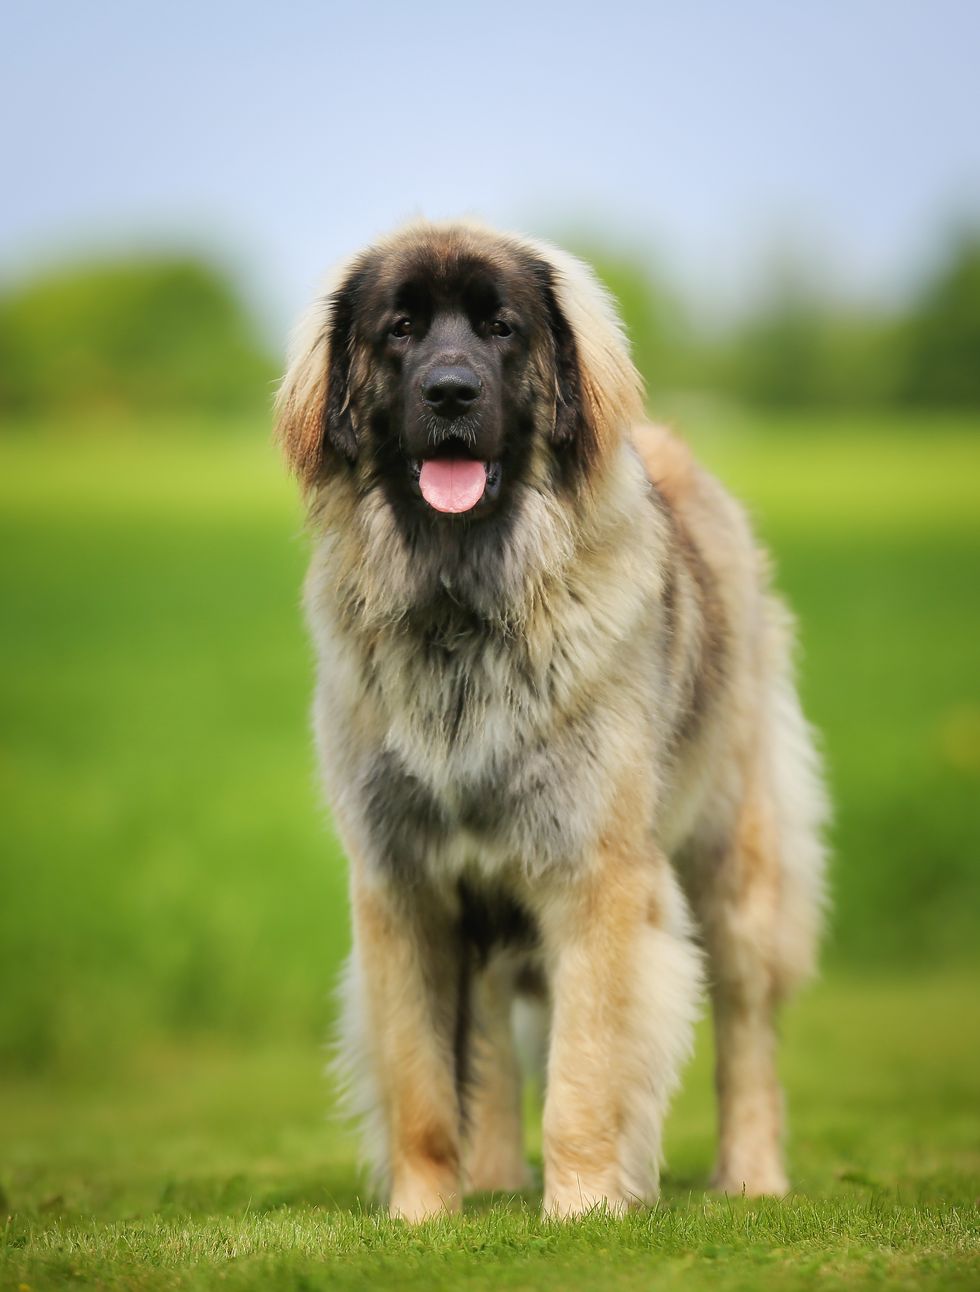 purebred leonberger dog with a black face and long brown, white and gray hair standing on the grass, panting